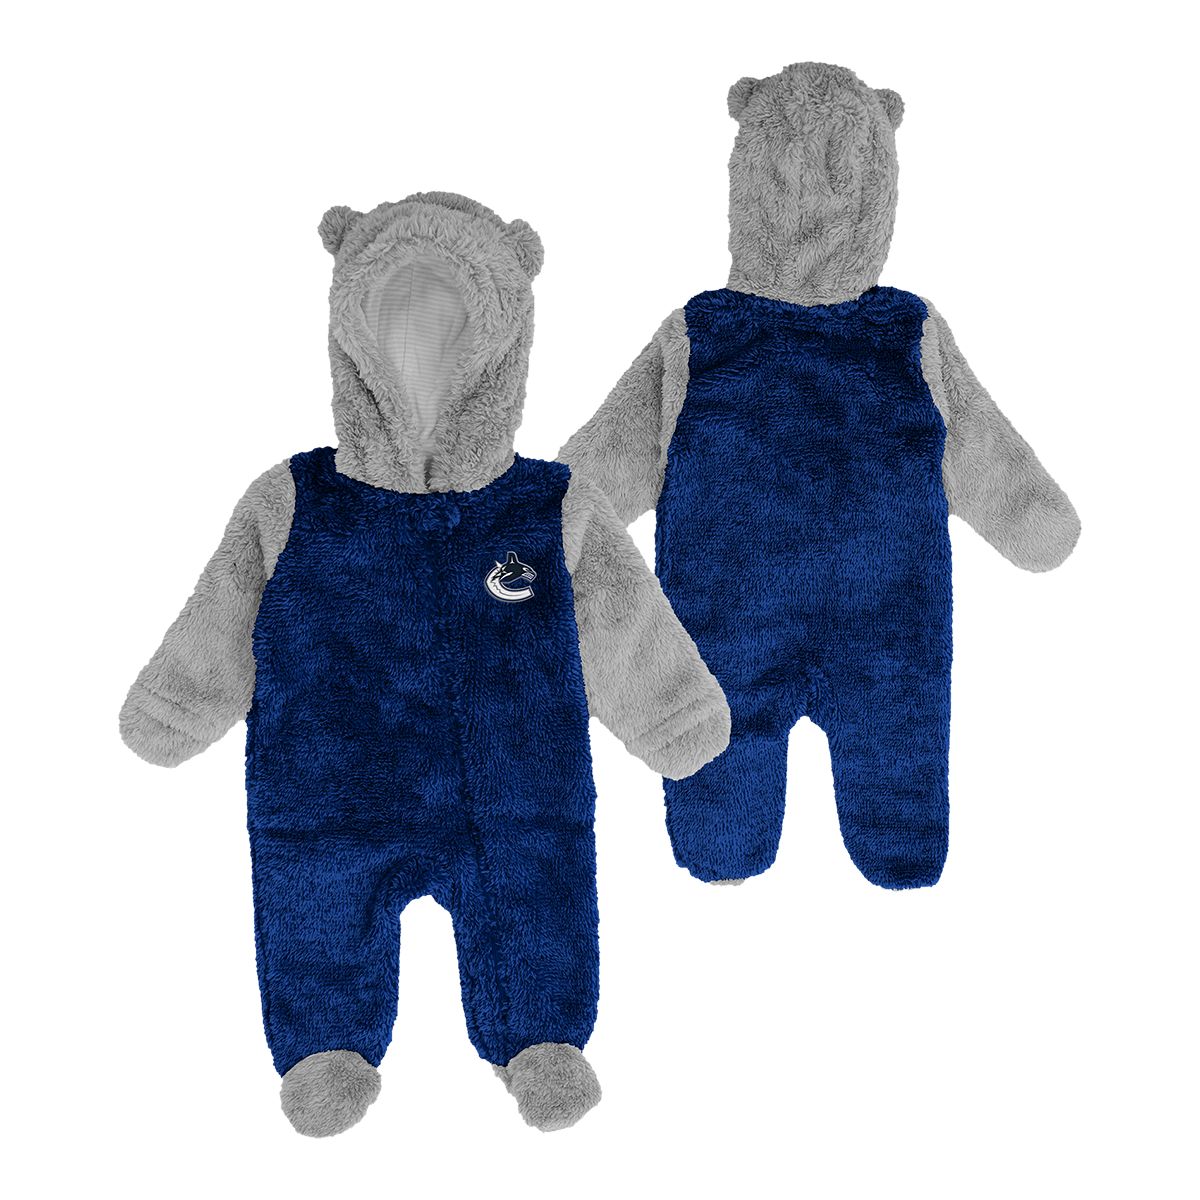  Outerstuff Infant Toronto Maple Leafs Faceoff Full-Zip